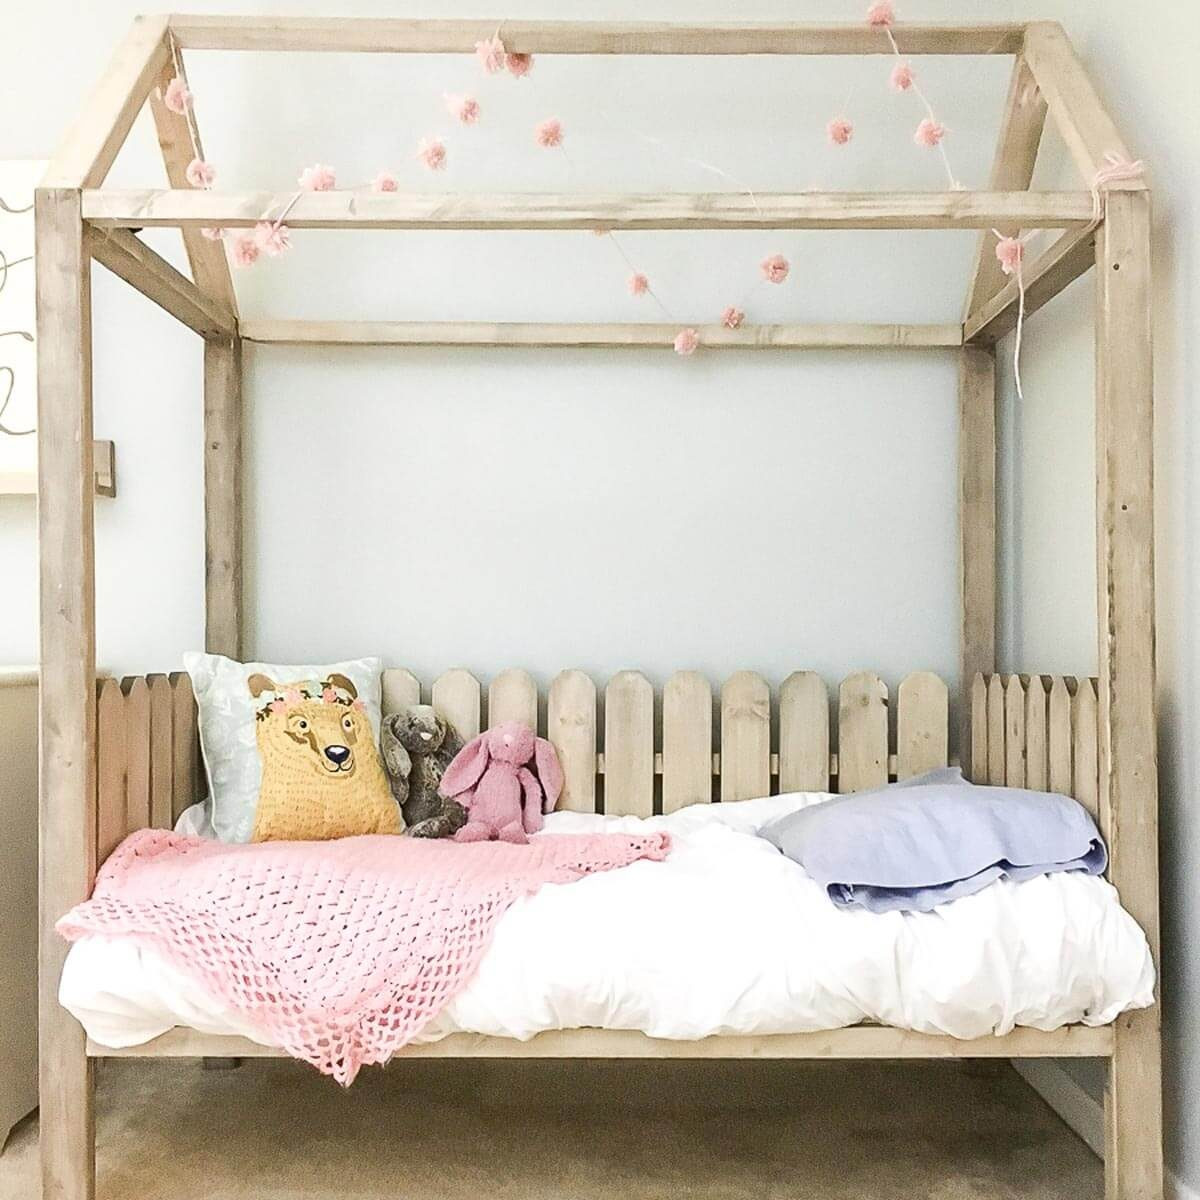 DIY Bed Frames Plans
 11 Great DIY Bed Frame Plans and Ideas — The Family Handyman